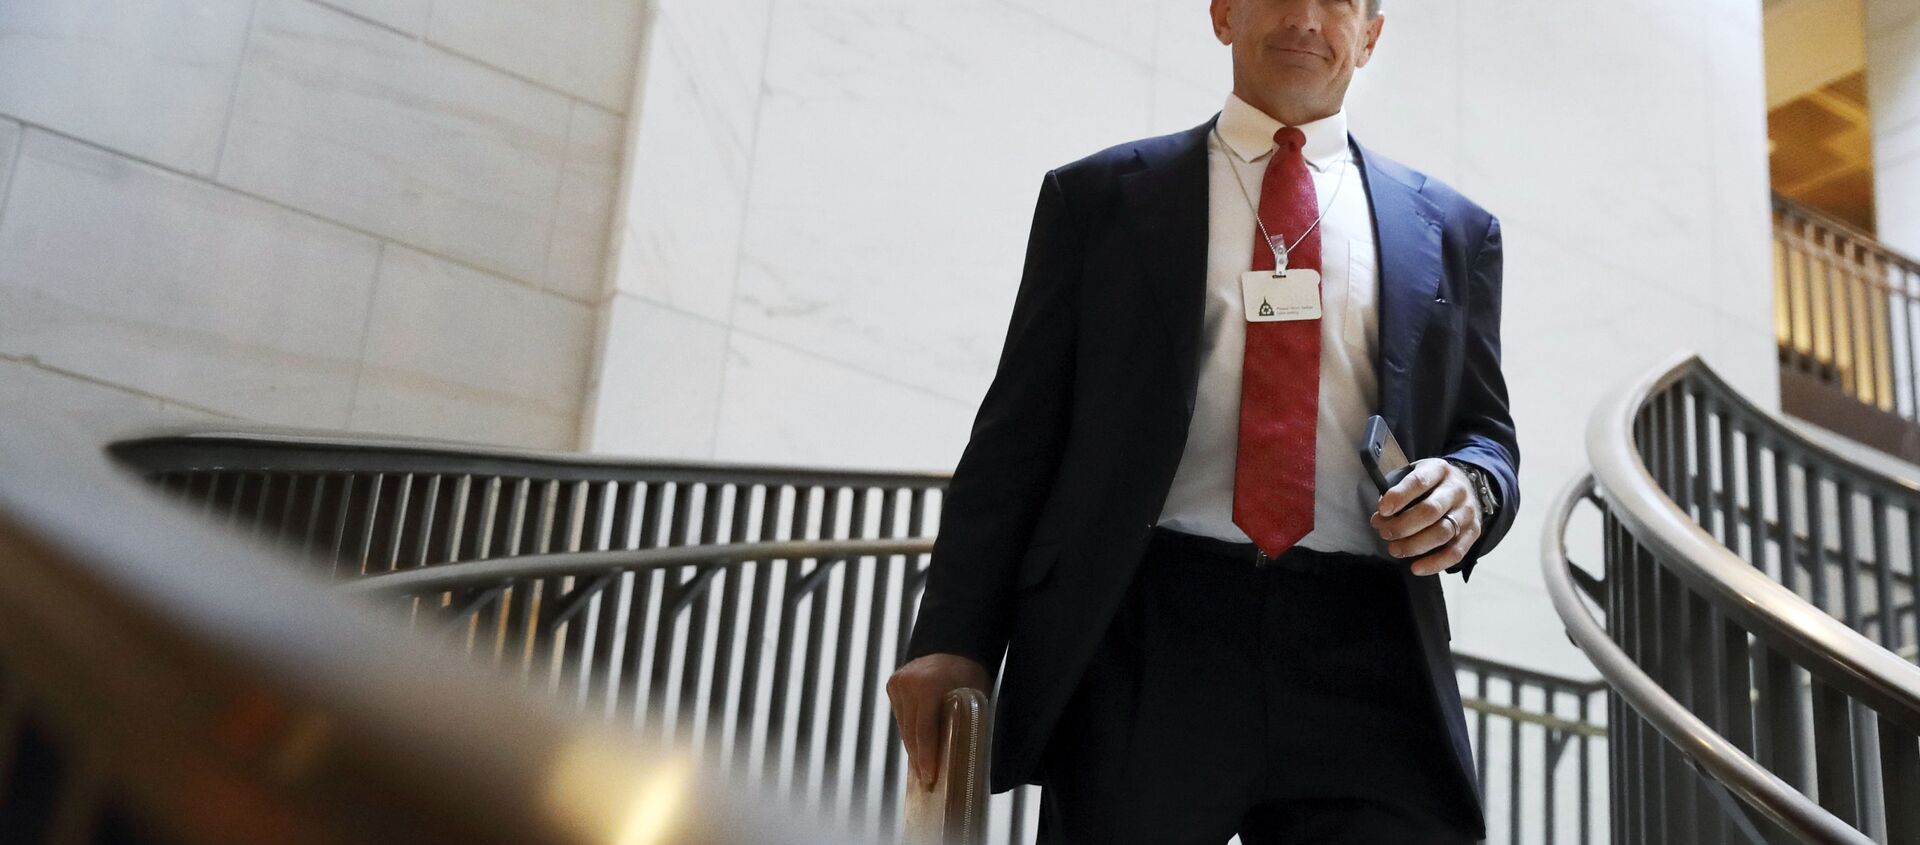 In this Nov. 30, 2017 file photo, Blackwater founder Erik Prince arrives for a closed meeting with members of the House Intelligence Committee on Capitol Hill in Washington. - Sputnik International, 1920, 07.07.2021